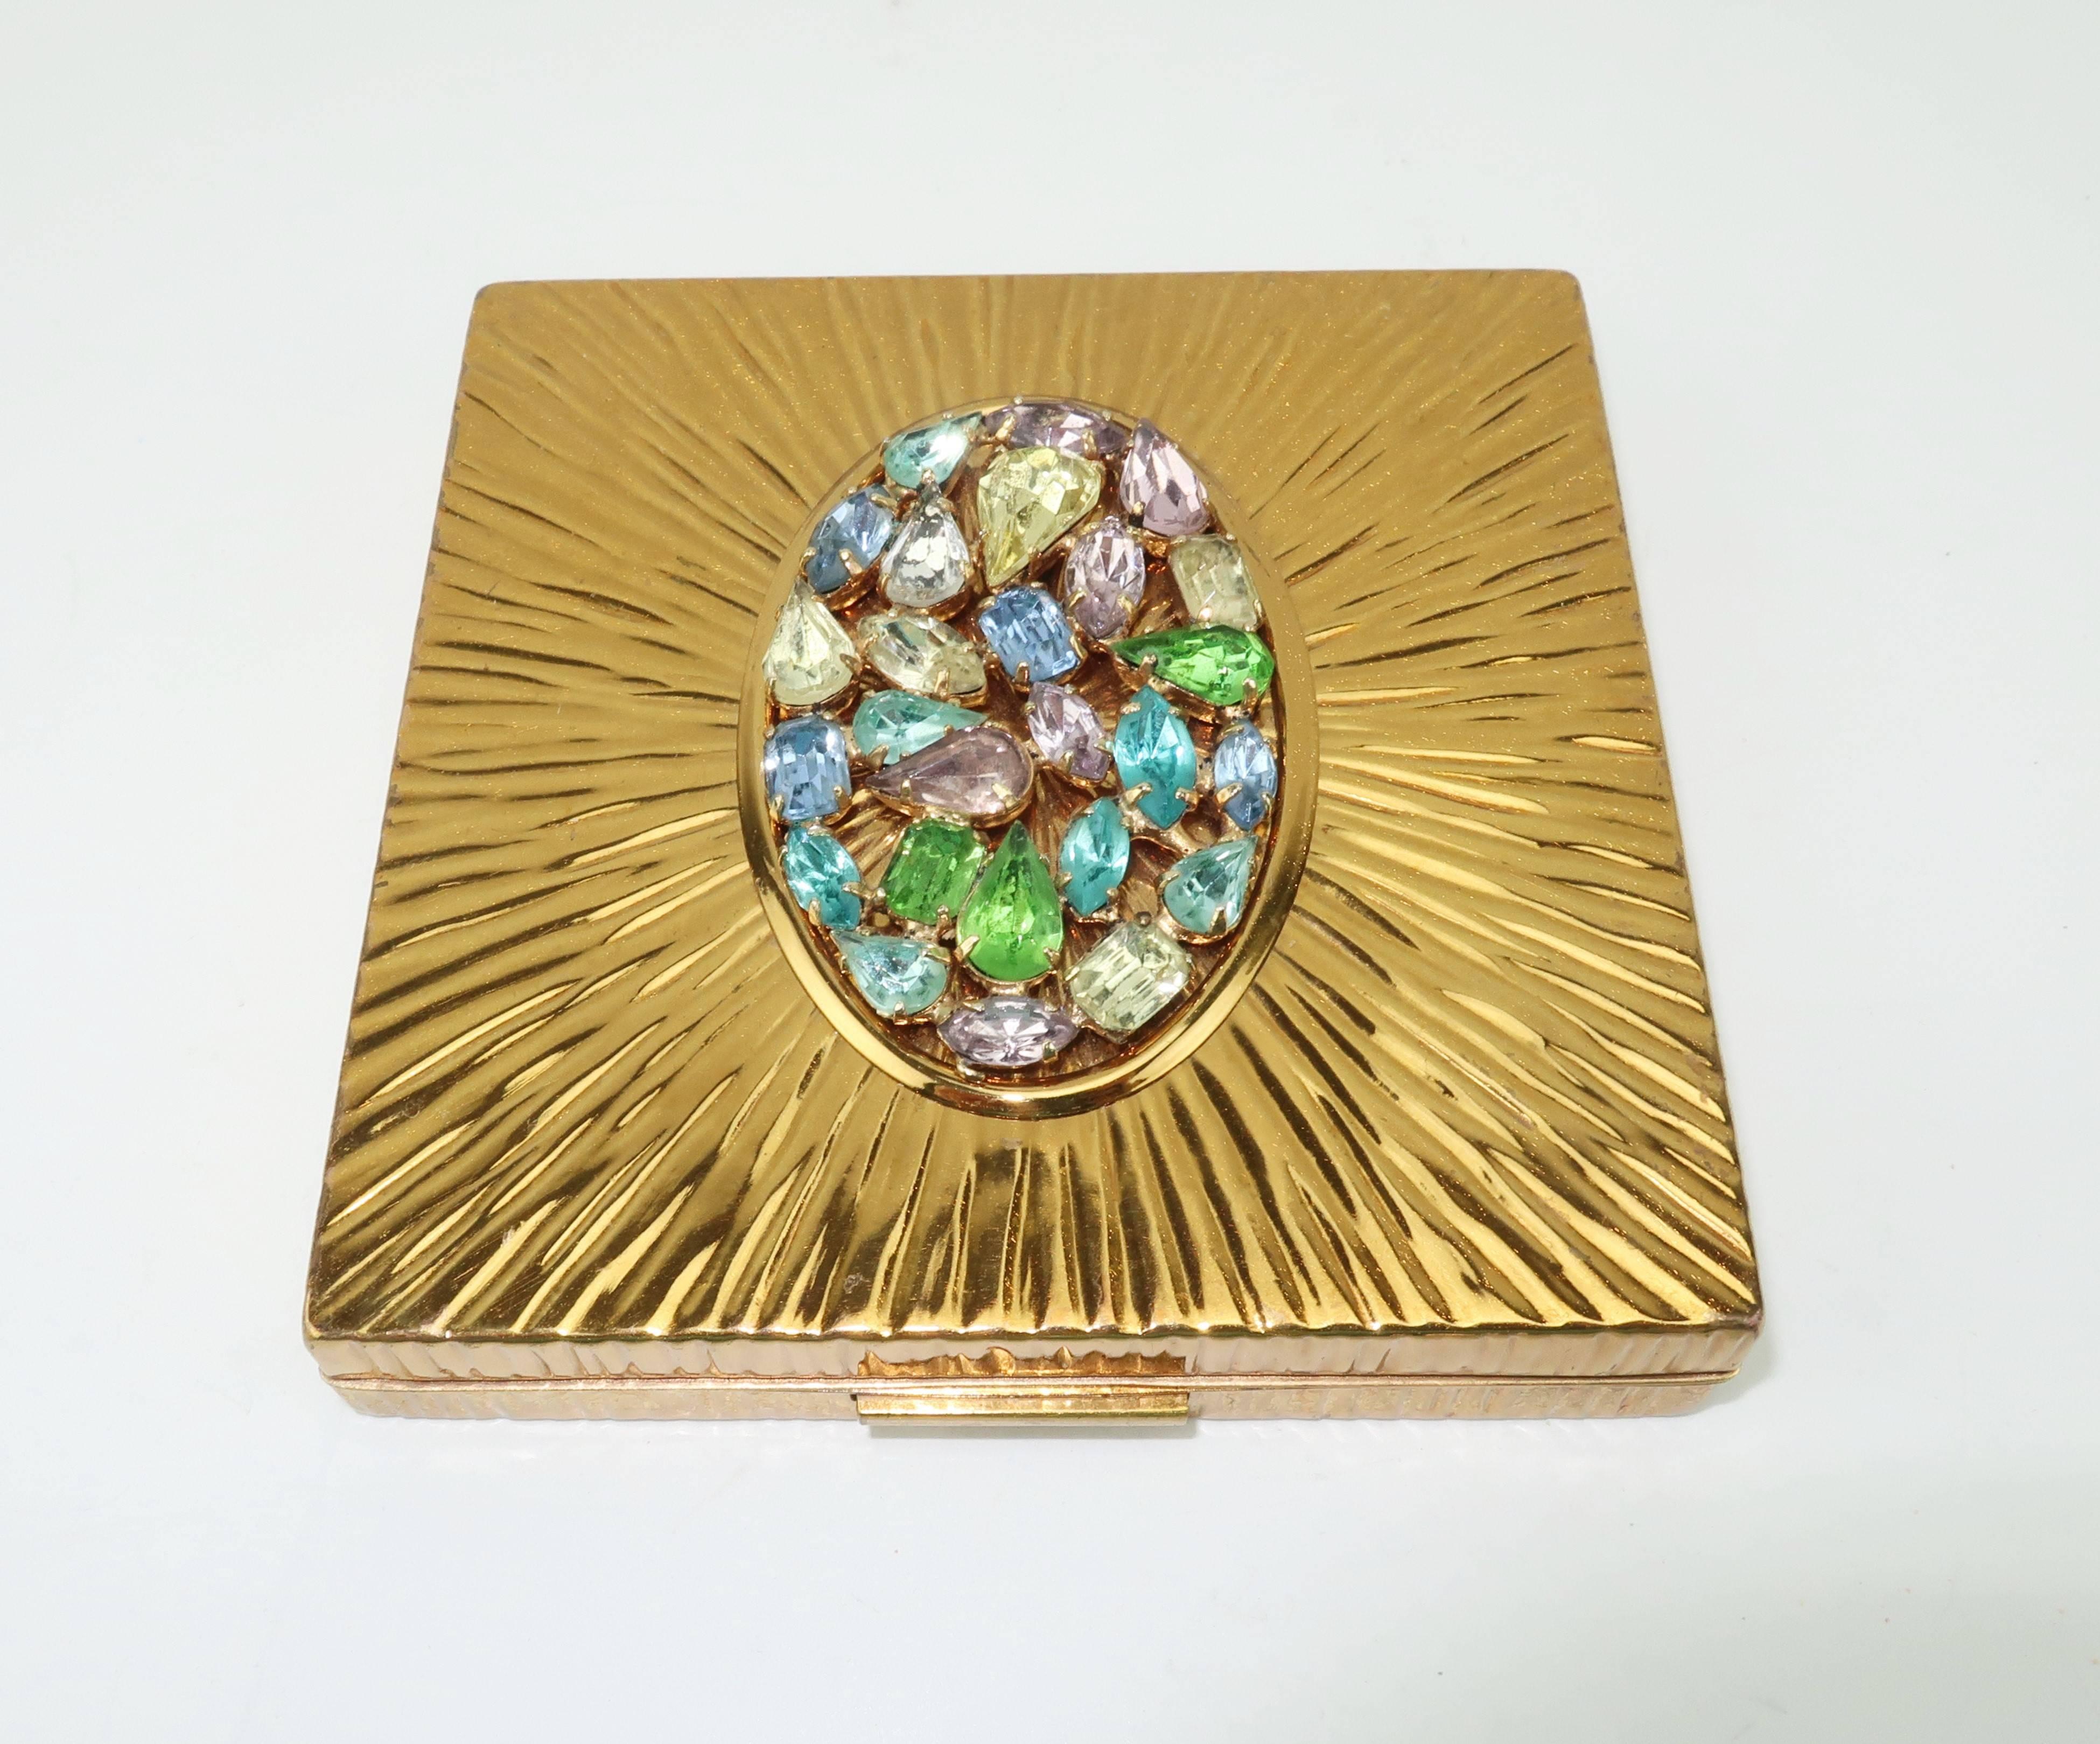 What a dazzler!  This Evans compact with a gold tone starburst pattern is embellished with pastel crystal rhinestones.  The Evans Co. can trace it's roots back to early American button makers and in the early 1900's wisely saw an opportunity to